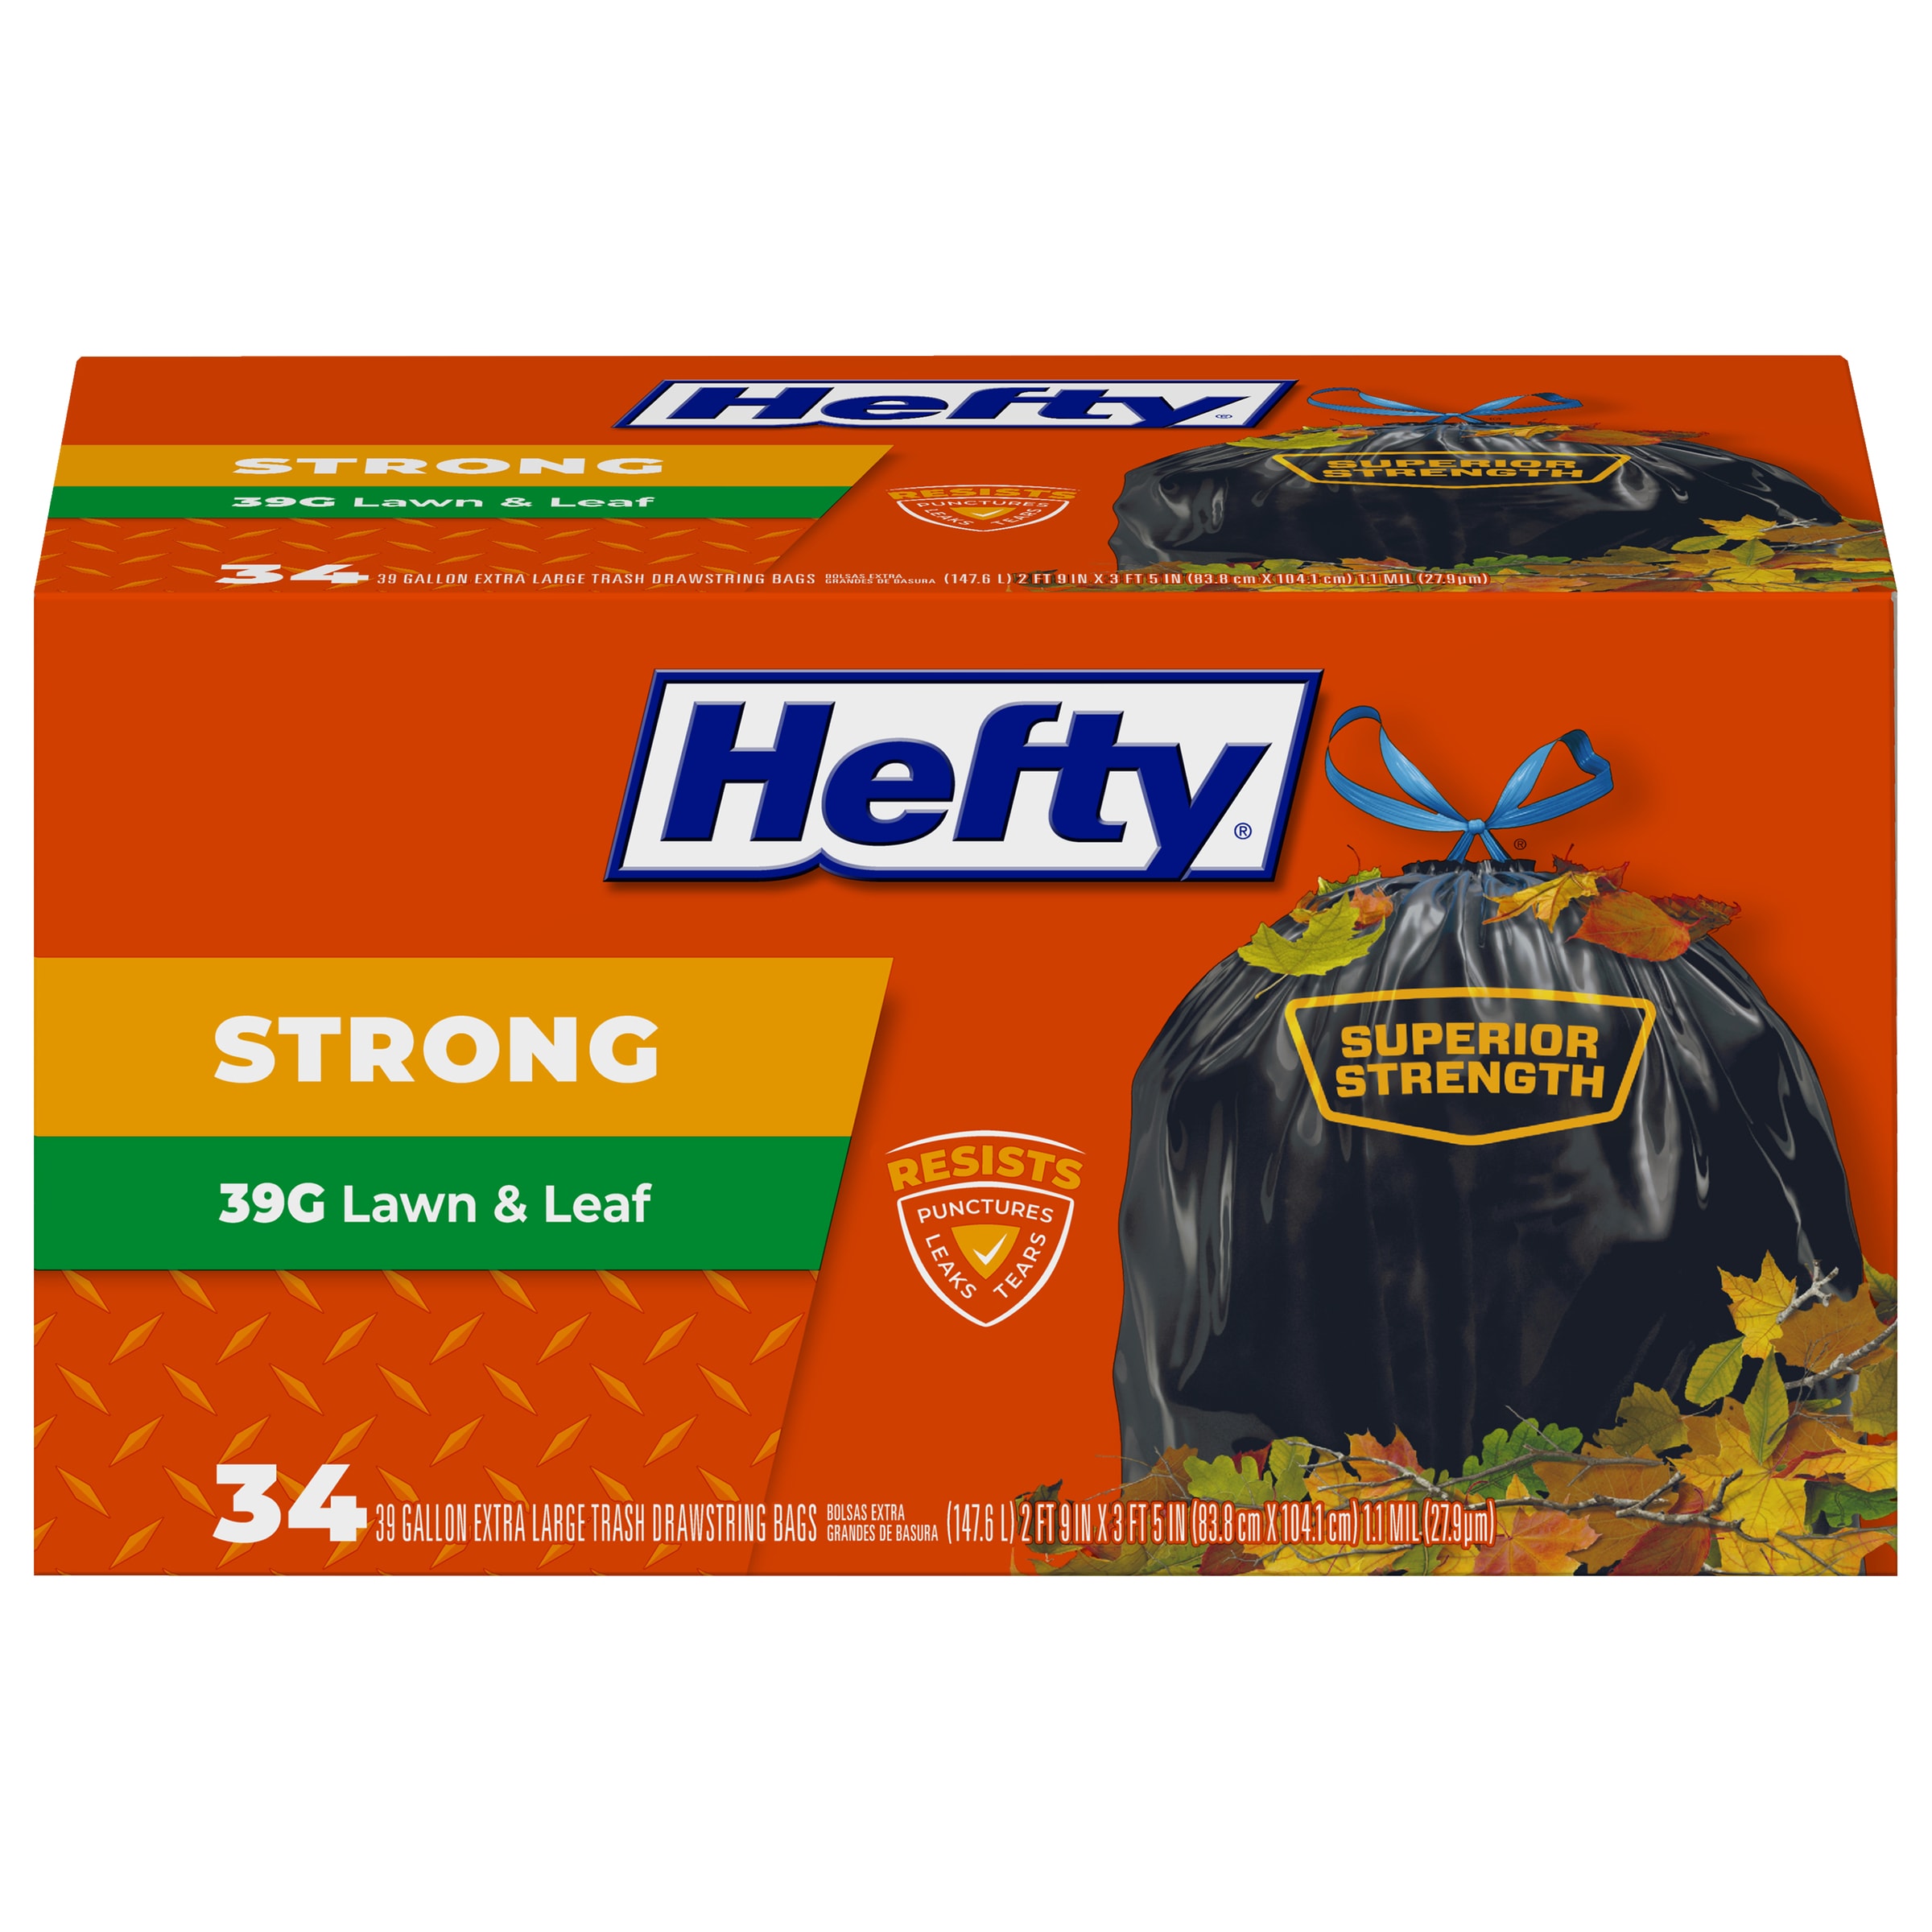 Hefty Ultra Strong Multipurpose Large Trash Bags, Black, Unscented, 30  Gallon, 14 Count